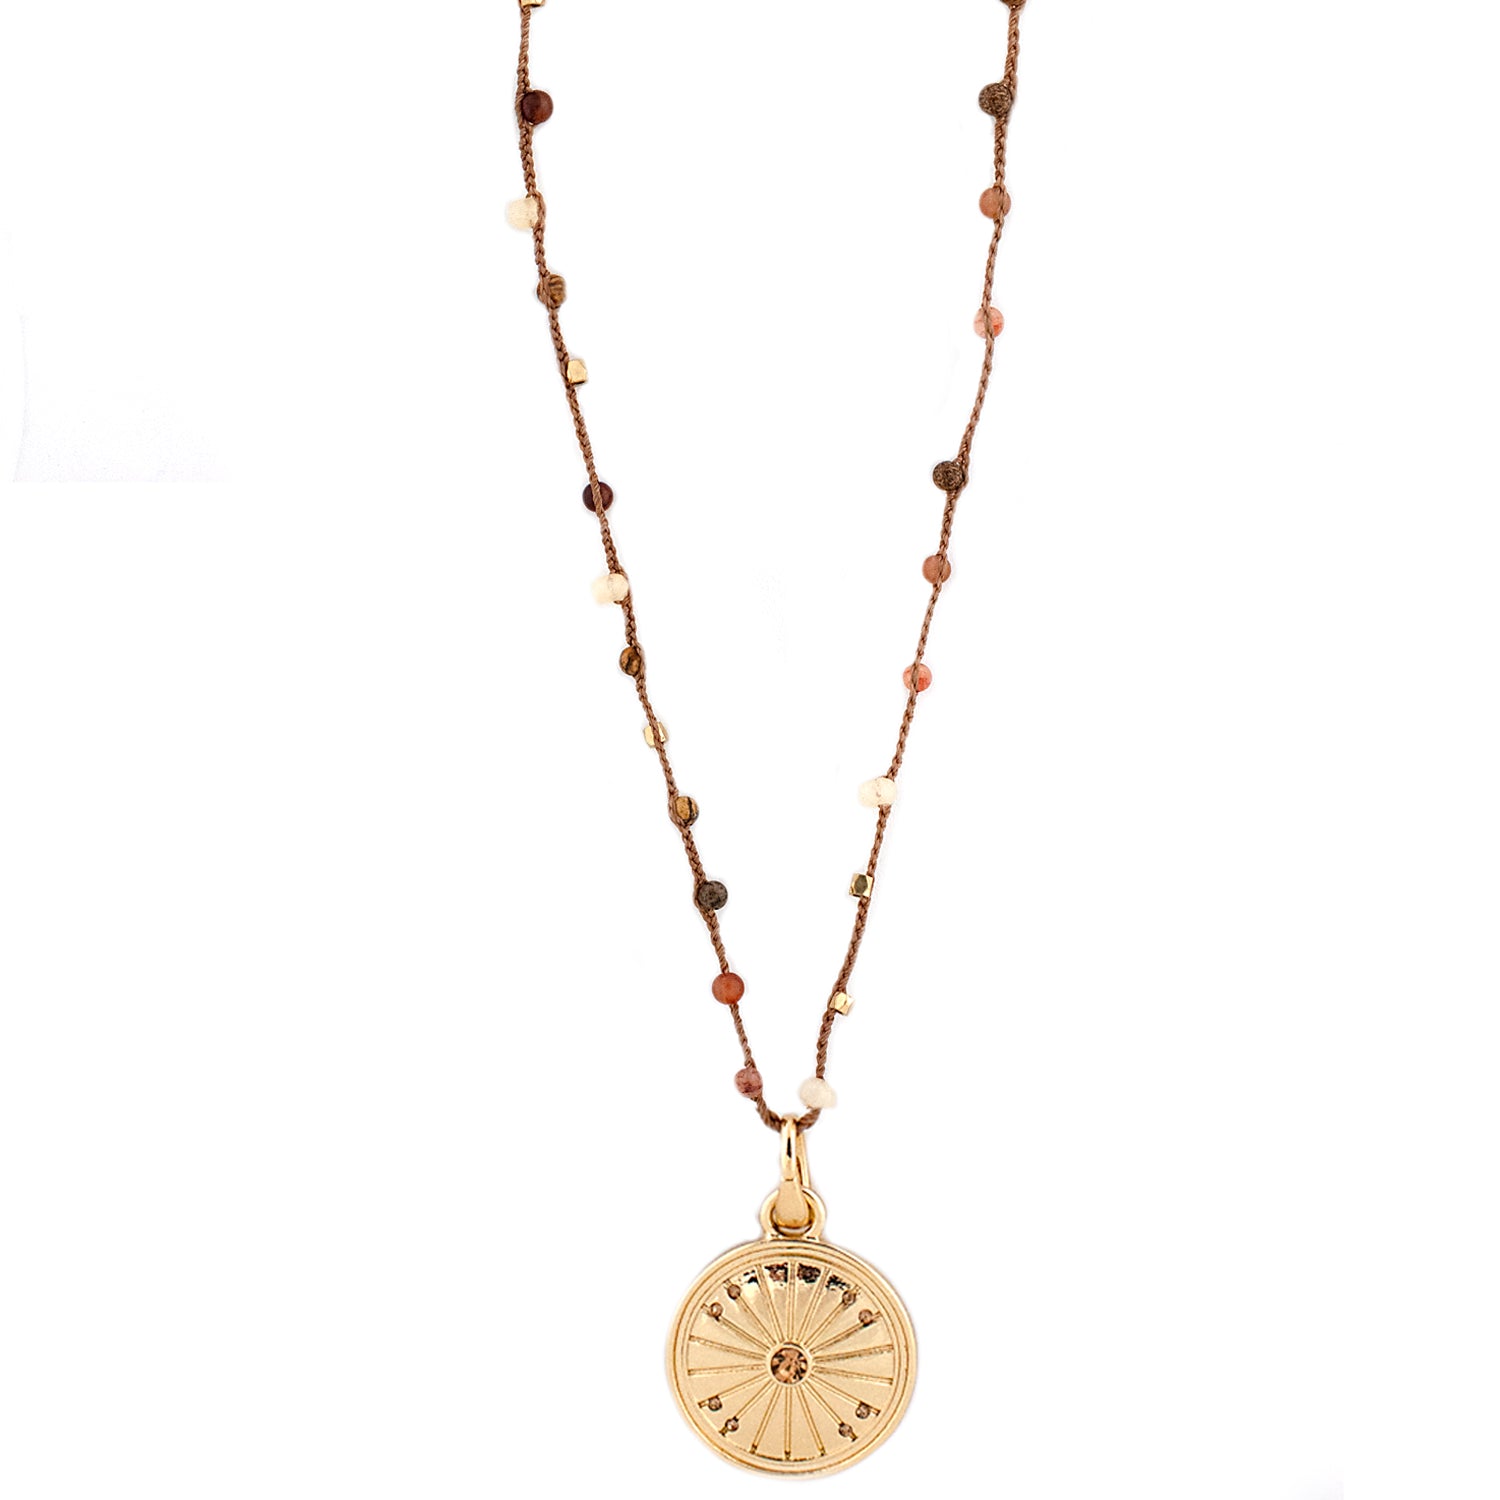 Marlyn Schiff Braided Cord Disc Pendant Necklace